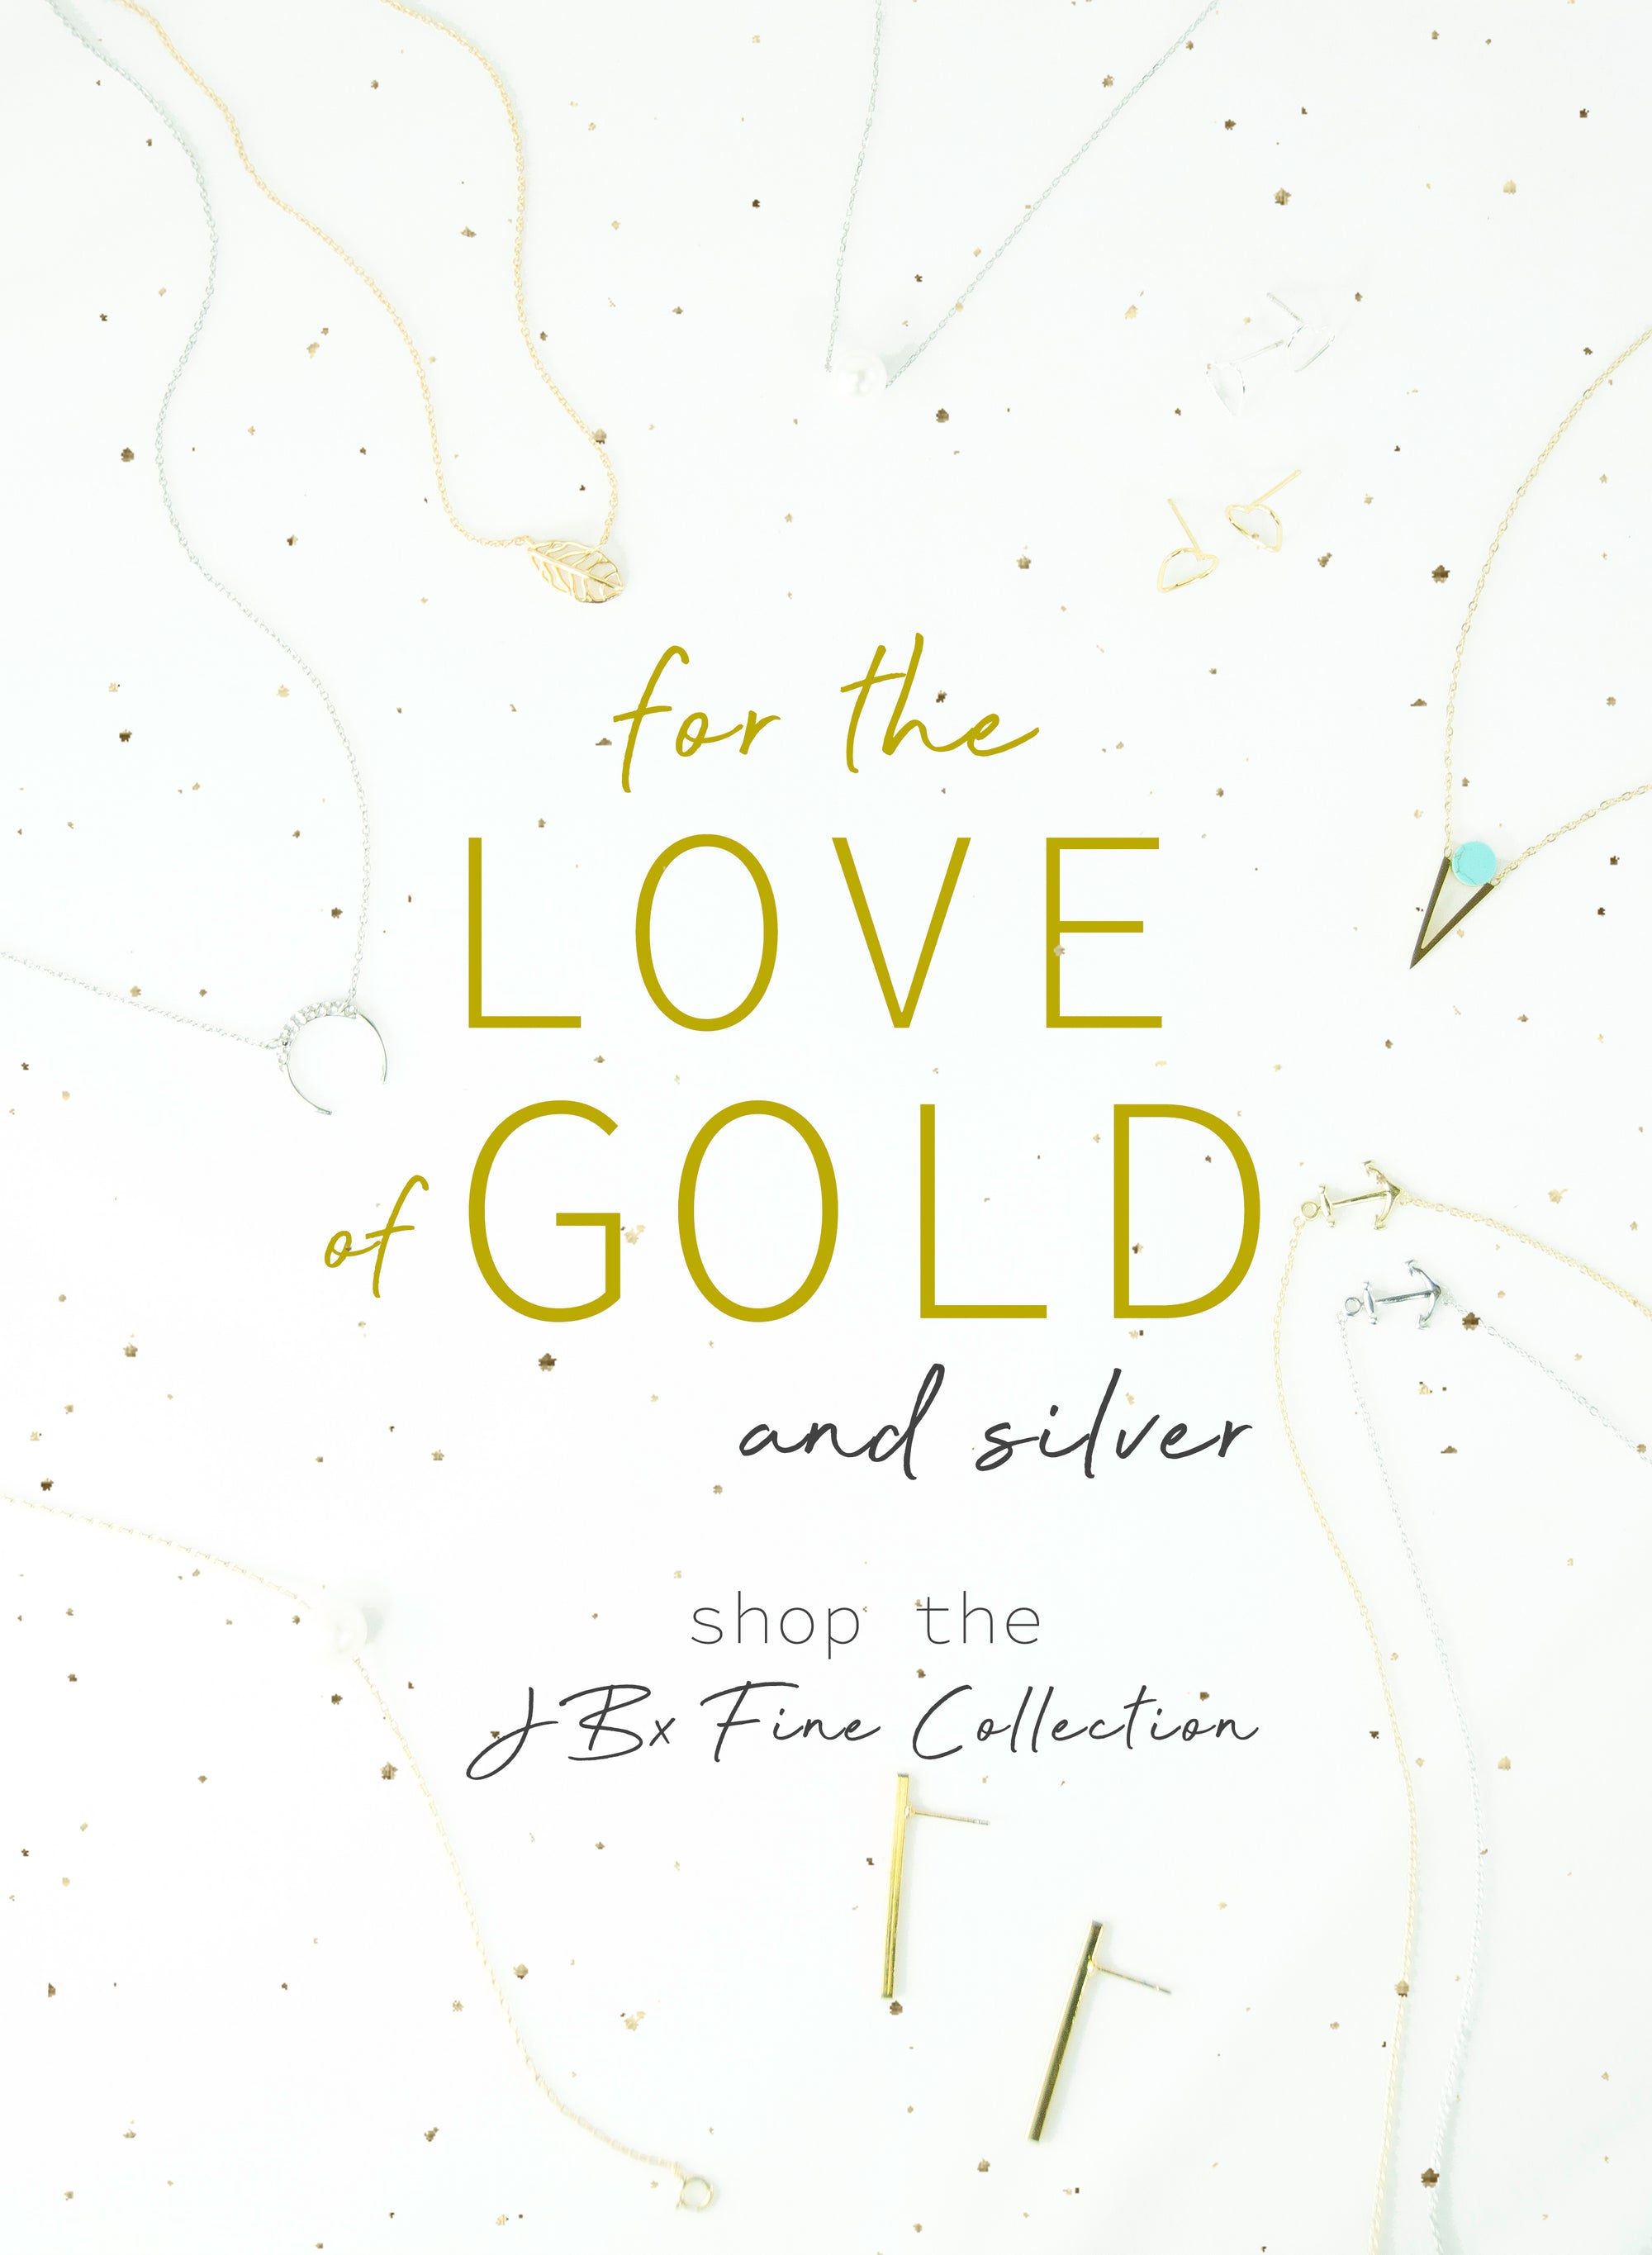 For the Love of Gold and silver shop the jewelry bx fine collection